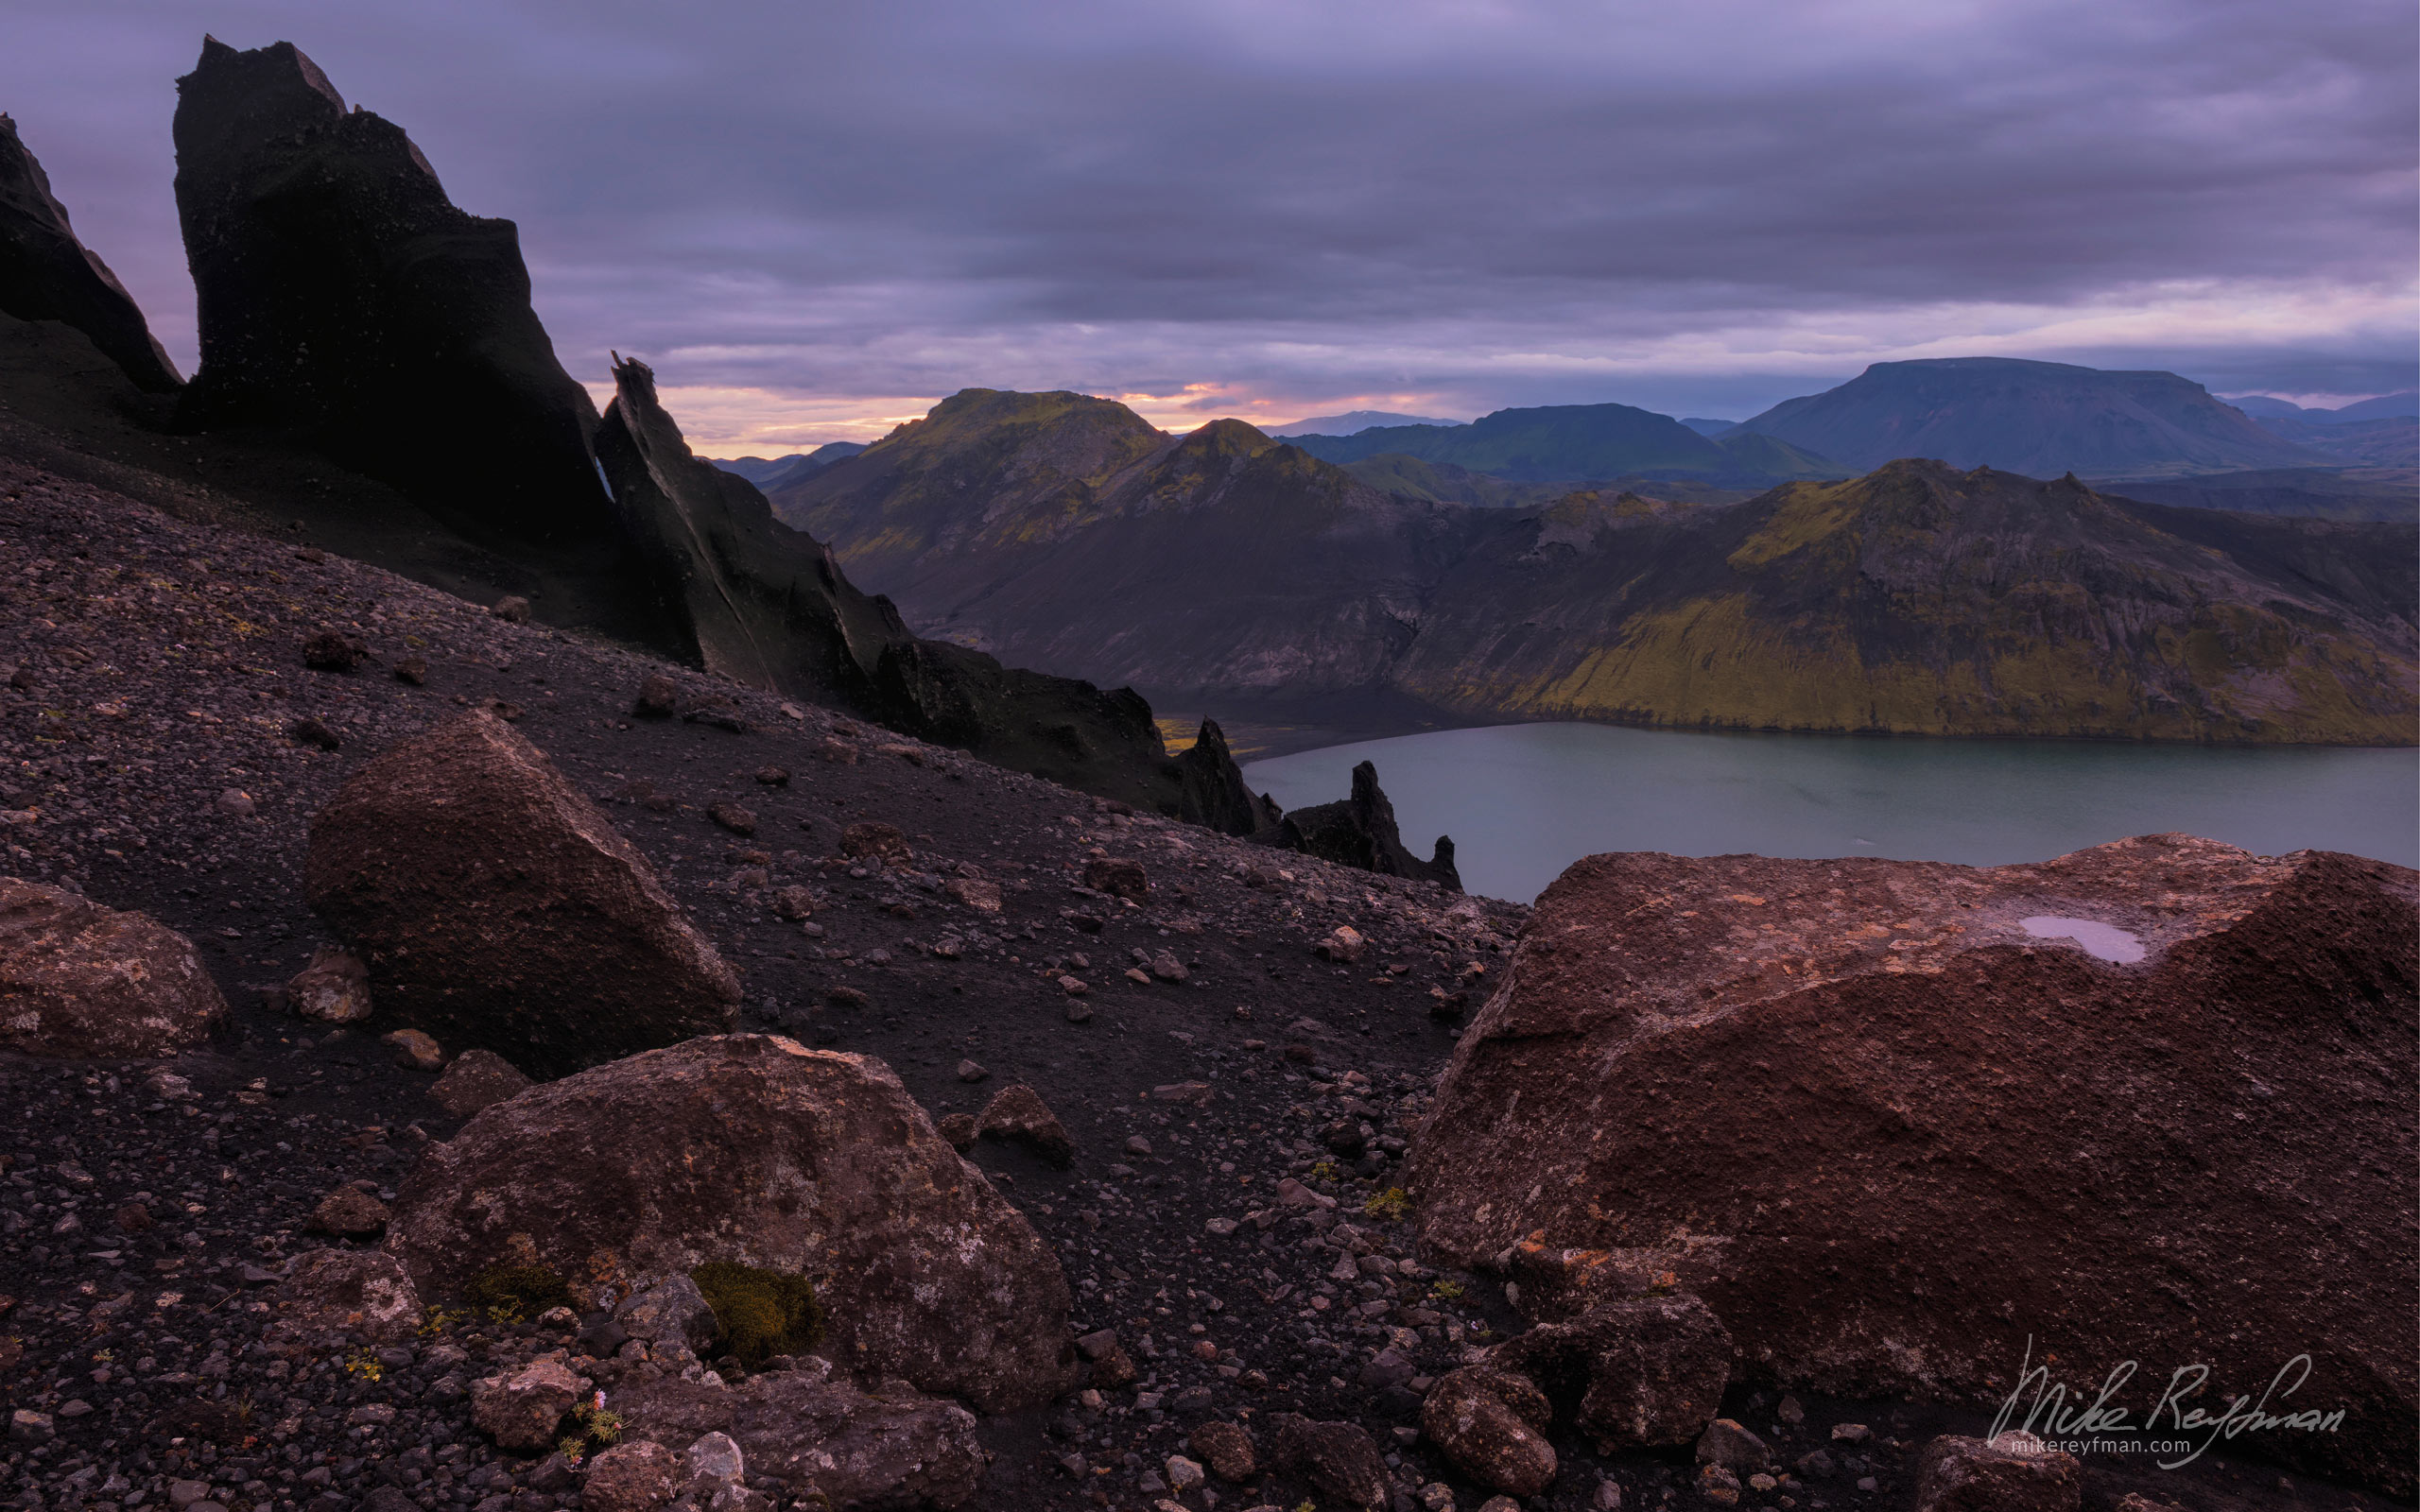 Lake Alftavatn view from Mt. Bratthals. Southern Fjallabak, Iceland 129-IC-GP _O3X3008 - Rhyolite Mountains, Crater Lakes, Geothermal Areas, Lava Fields and Glacial Rivers. Iceland.  - Mike Reyfman Photography